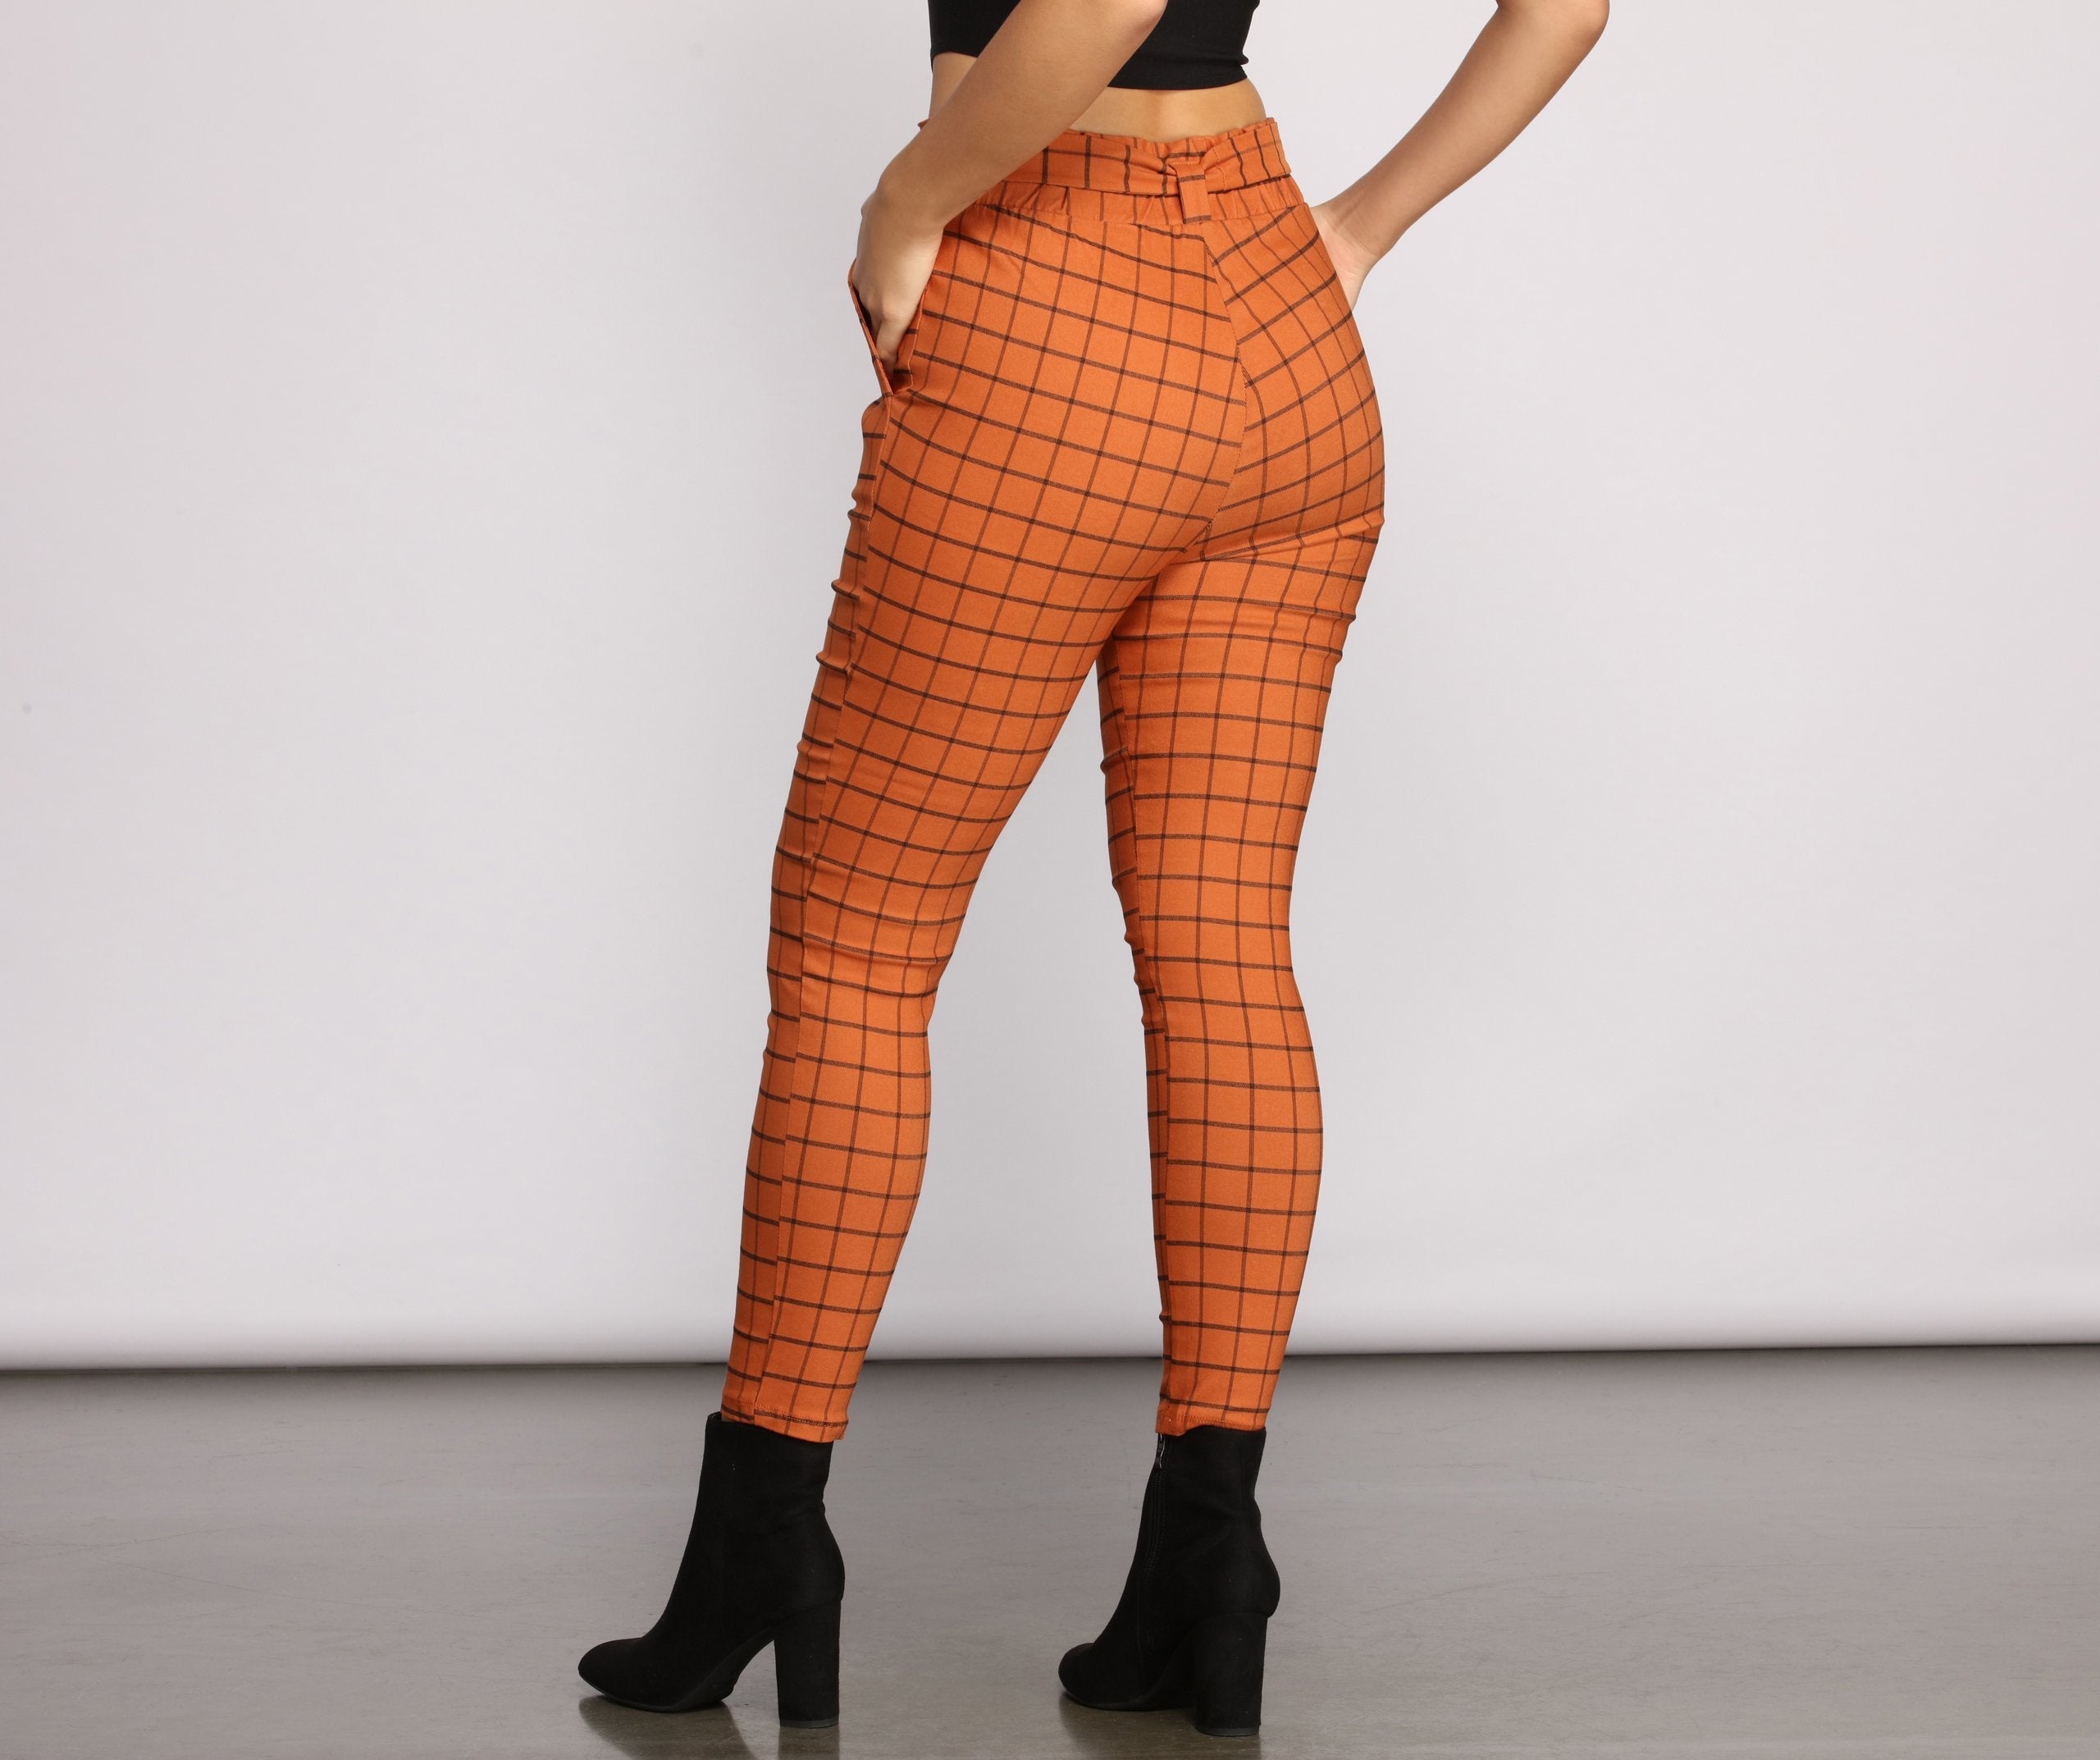 High Waist Paperbag Window Pane Pants - Lady Occasions